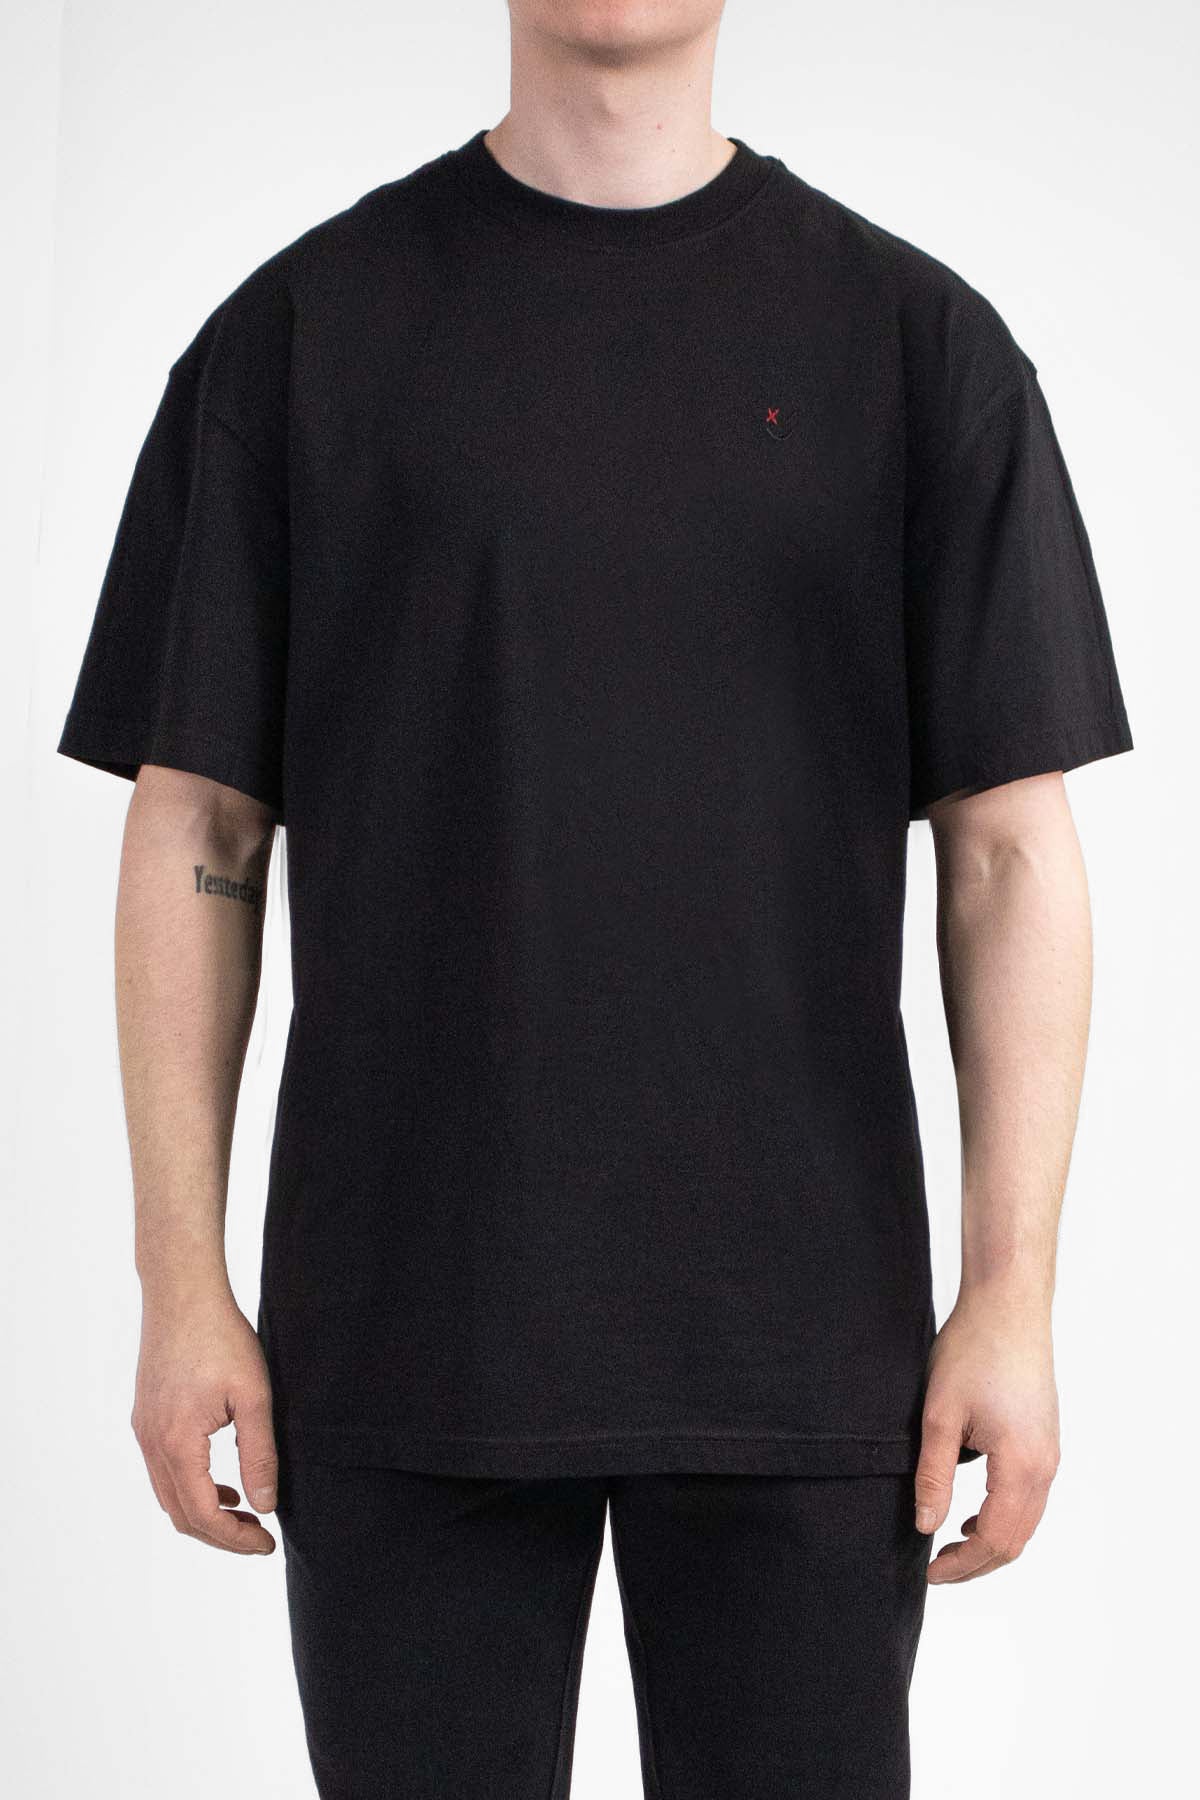 X RELAXED TEE